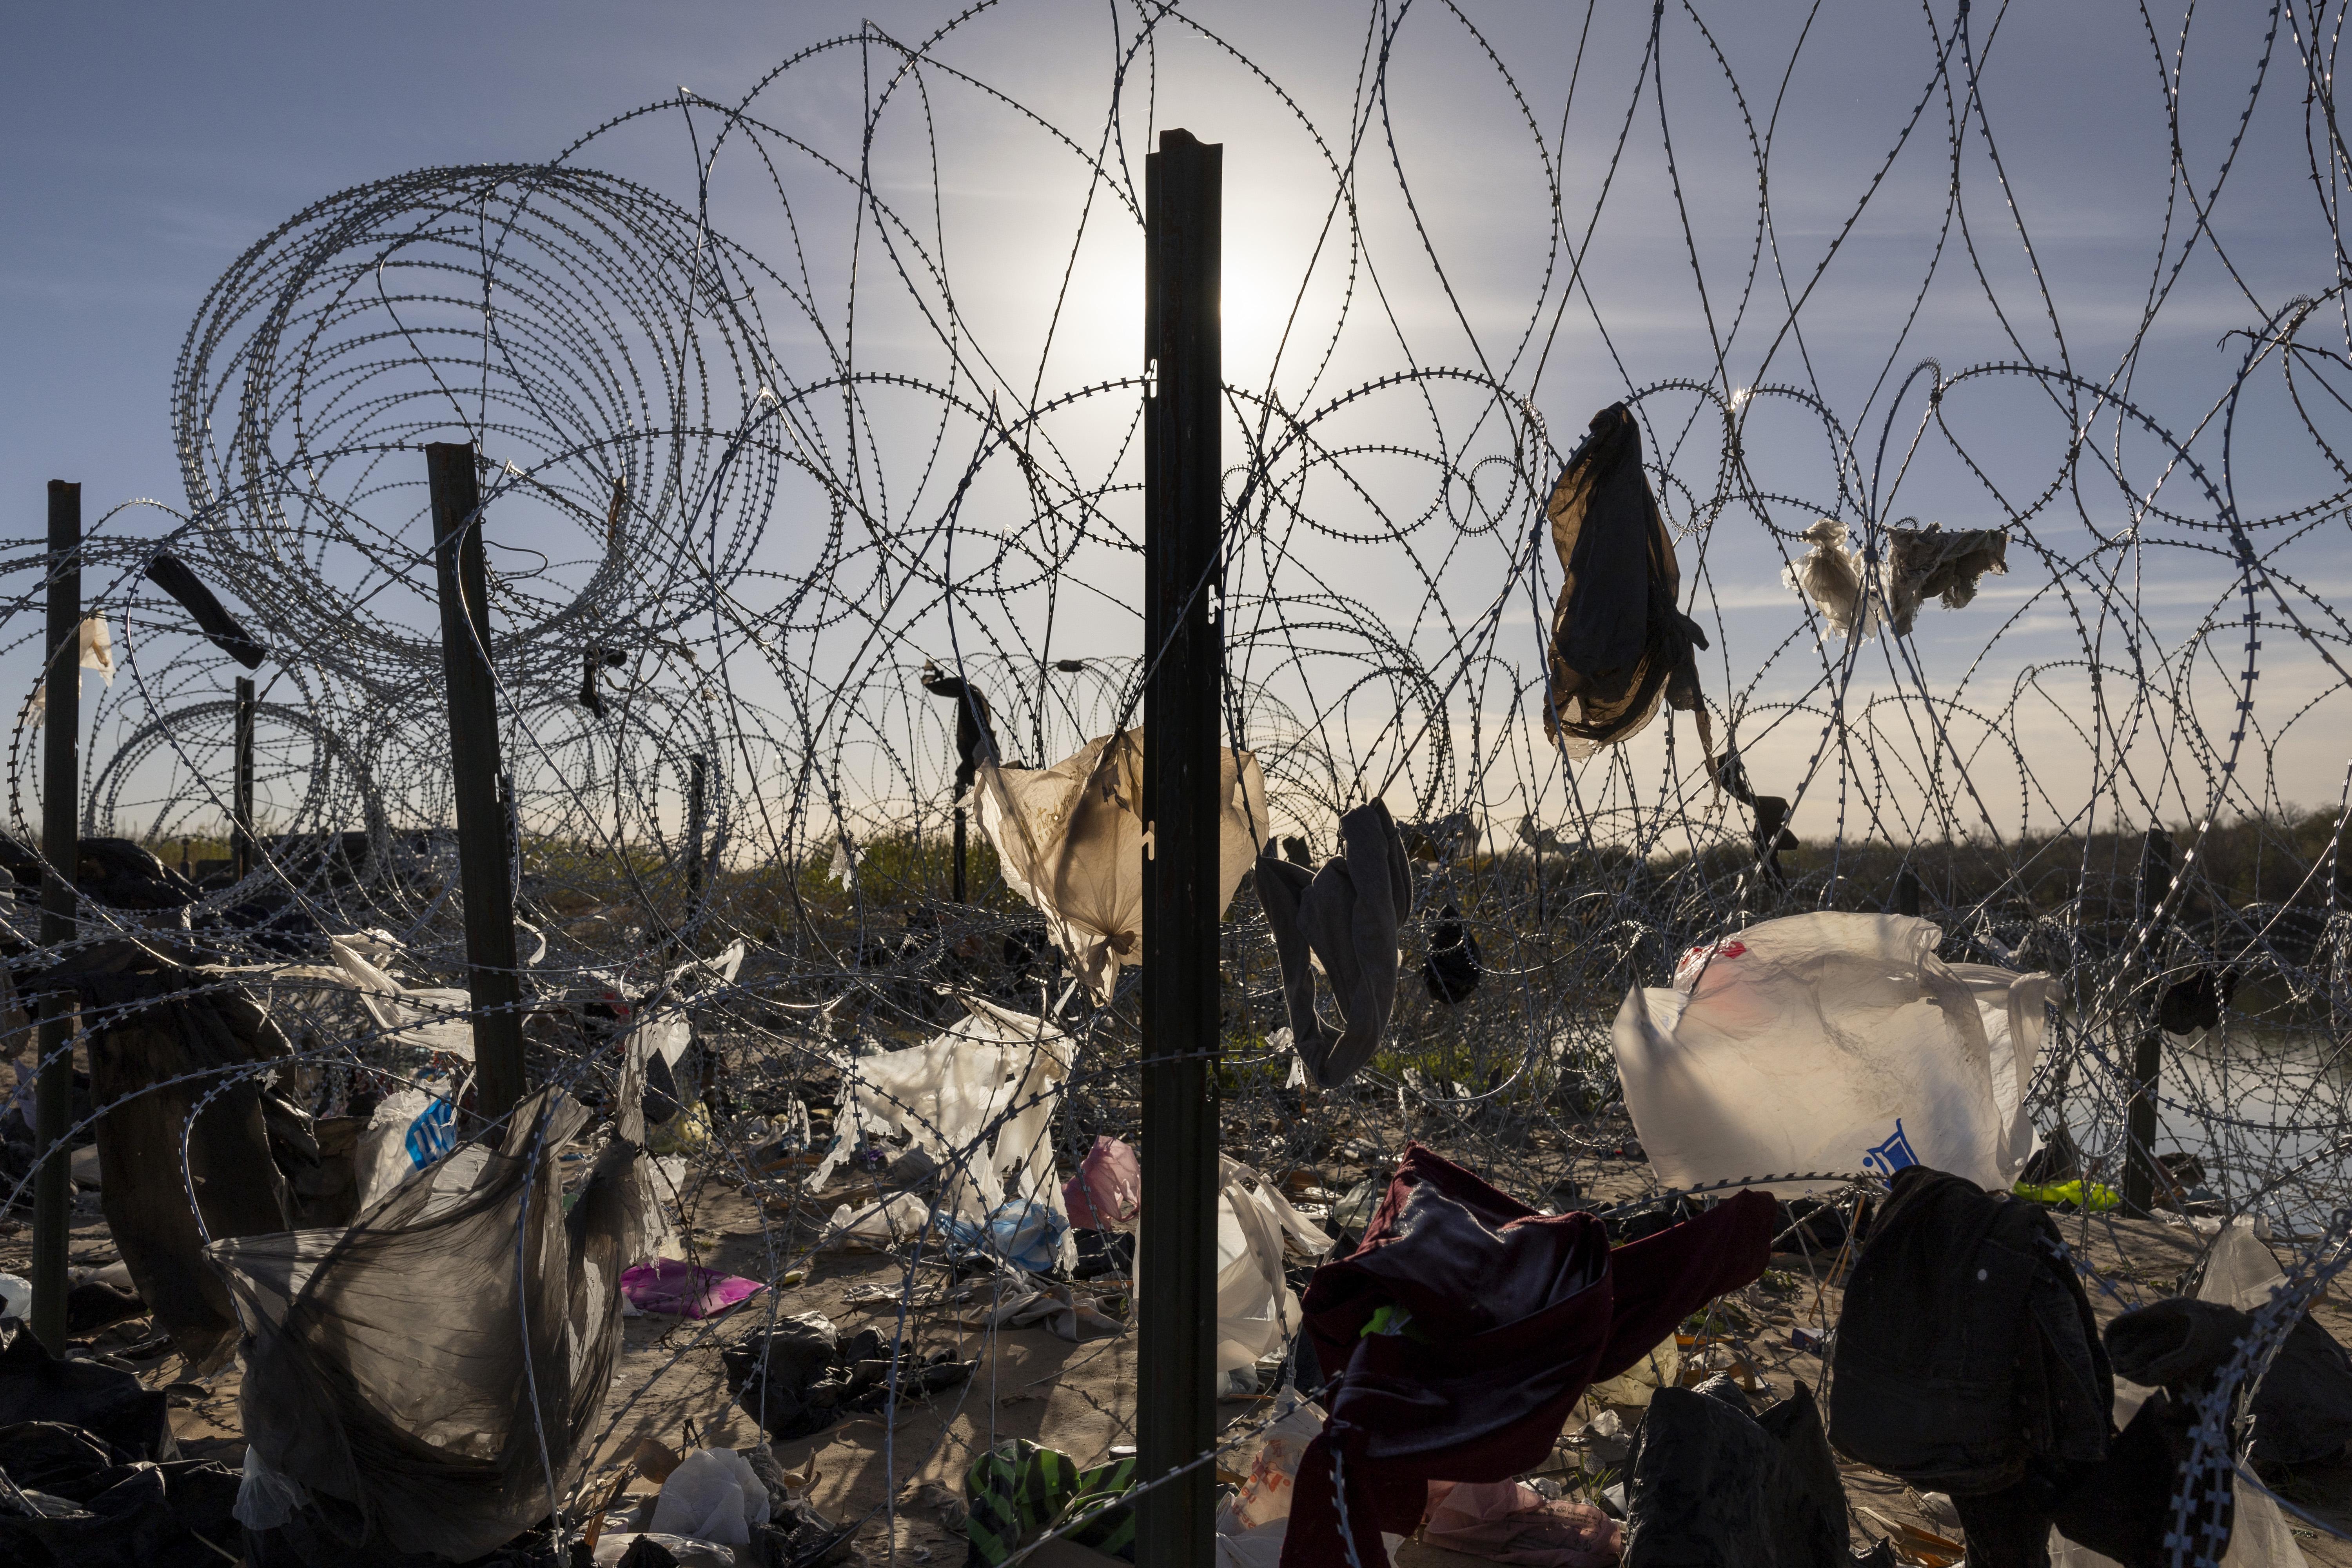 Clothing and plastic bags hang caught in razor wire near the Rio Grande on January 10, 2024 in Eagle Pass, Texas.